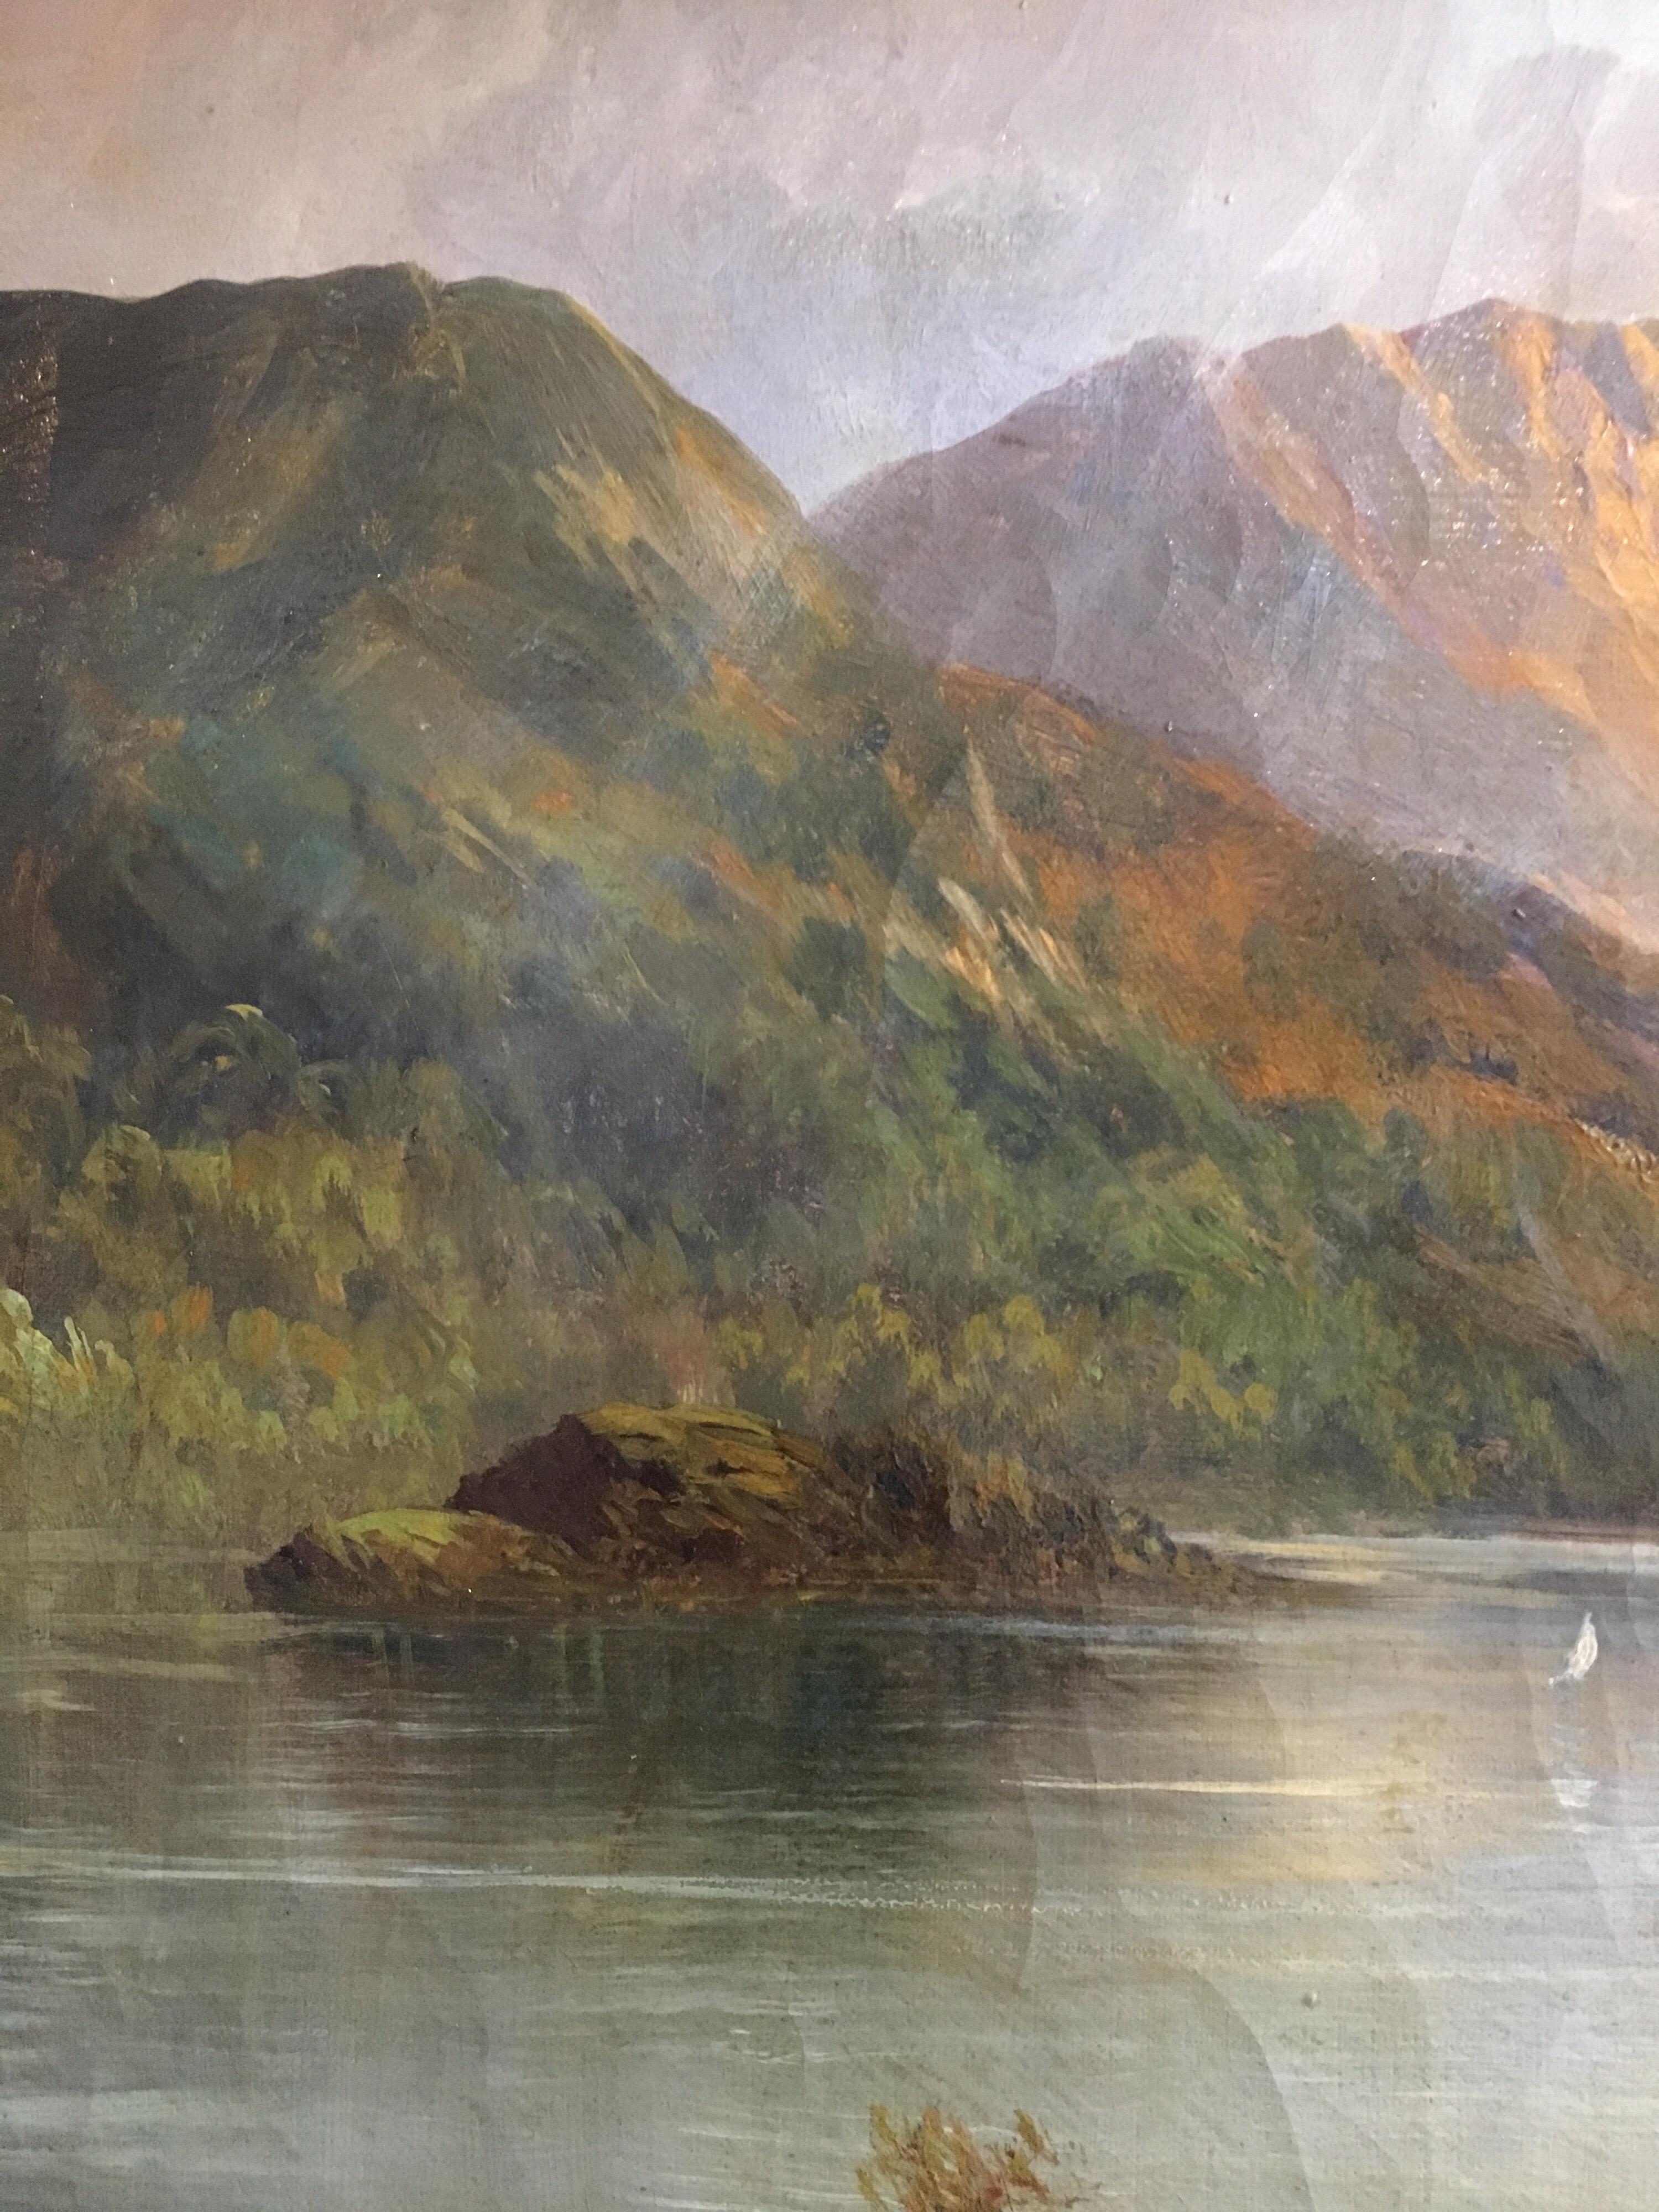 Ballachulish, Antique Scottish Oil Painting, Signed
by F. E. Jamieson (British 1895-1950)
Signed on the lower right hand corner
oil painting on canvas, framed
Framed size: 25 x 33 inches

Fine quality antique oil painting by the much admired and